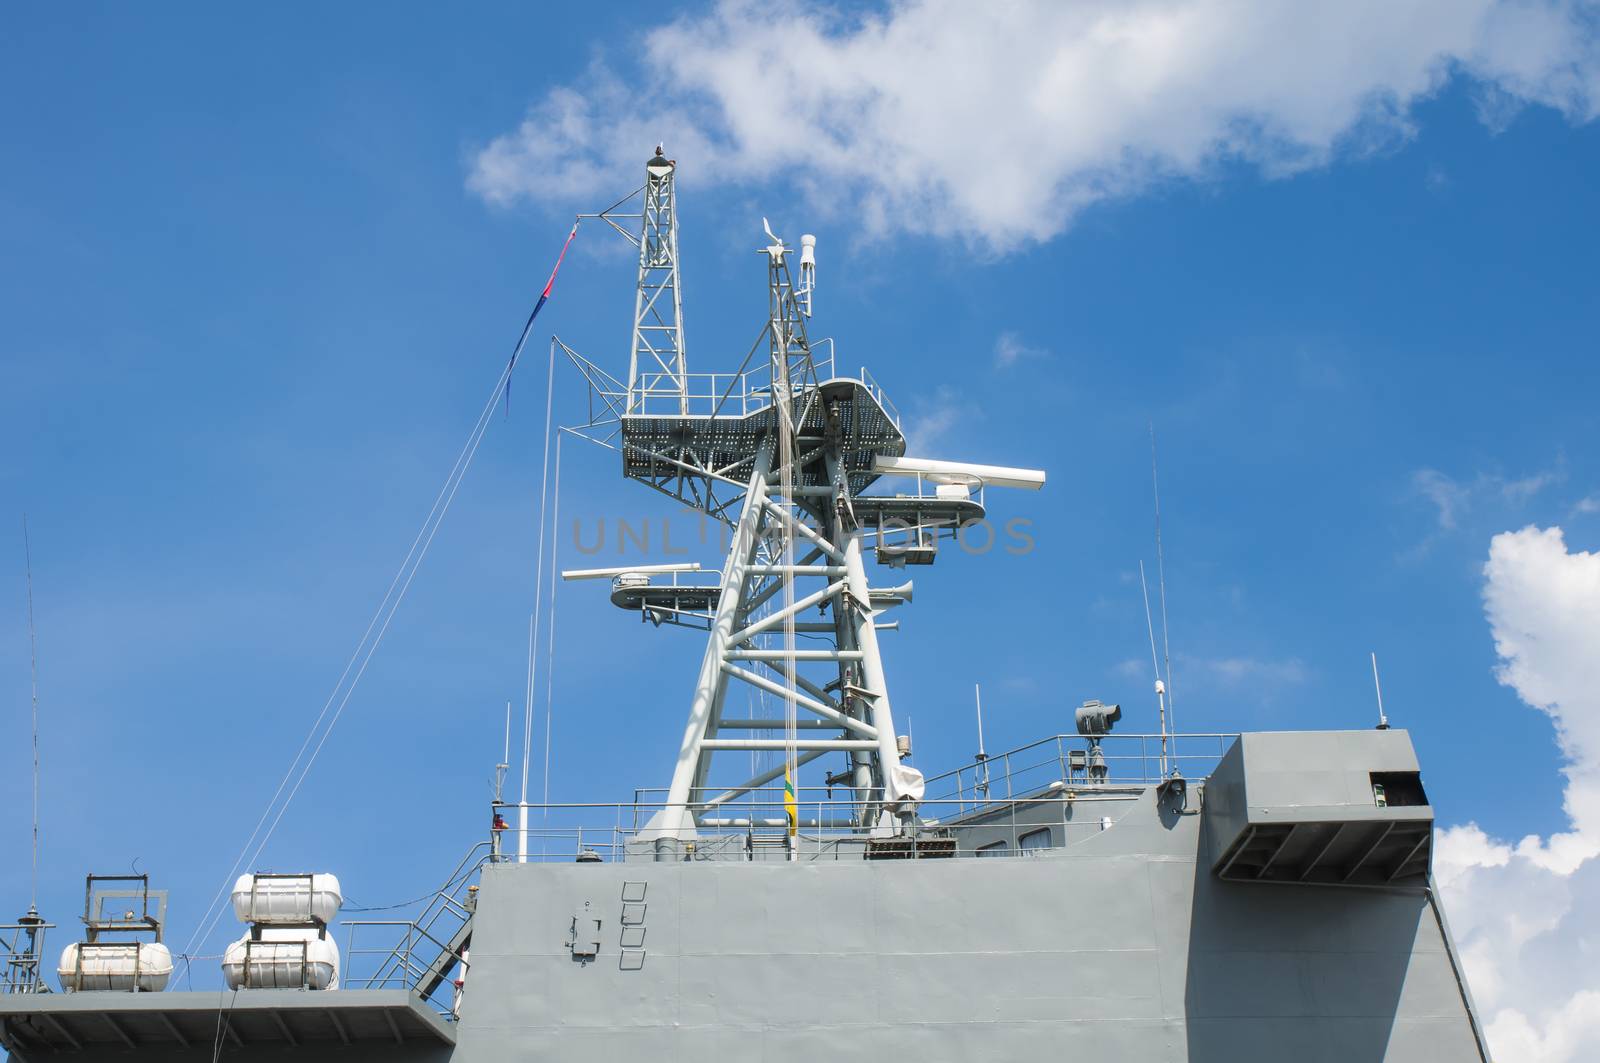 Detail of antenna on warship the Thailand navy ship